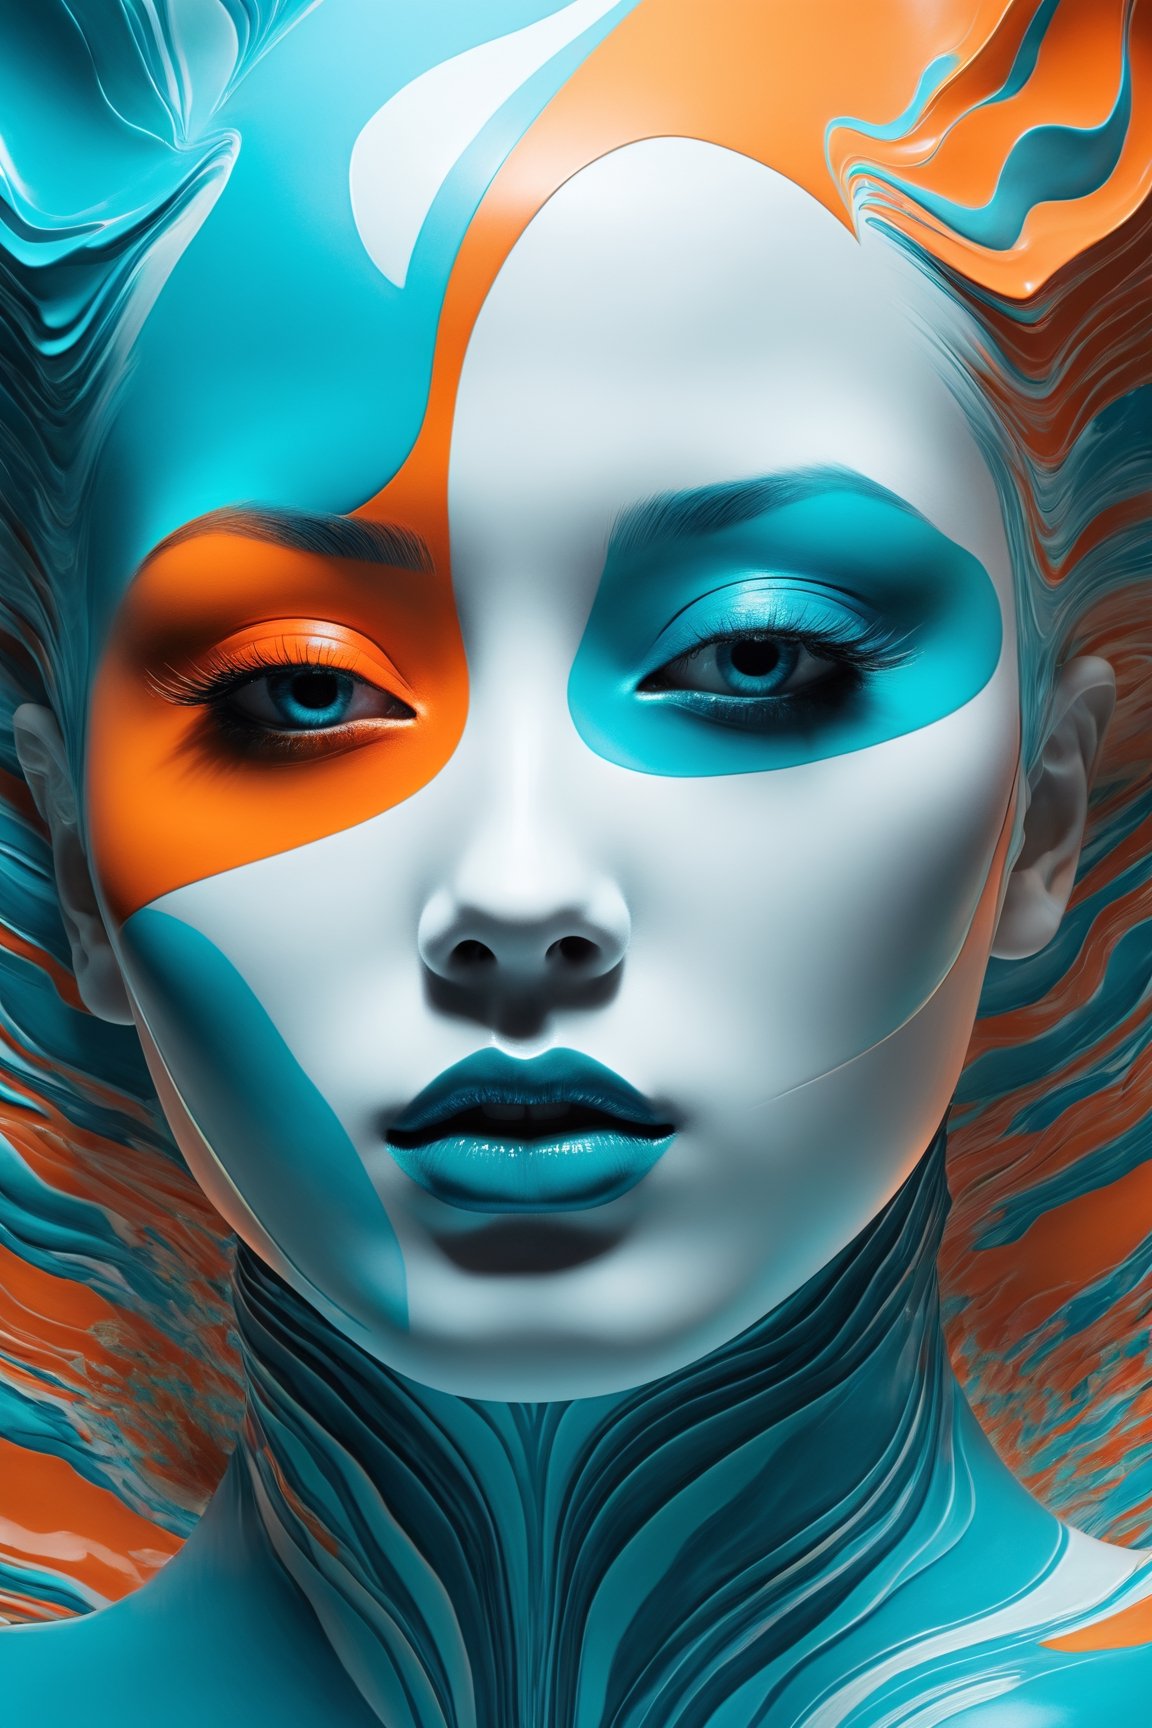 a closeup photo of pattern on a face, anaglyphic, dynamic composition and dramatic lighting, unusual, low camera angle and hyper-exaggerated perspective, blend of fine art photography and digital image manipulation, mesmerizing image, highly detailed, turquoise, orange, blue. Art style by Ito Ōgure, Vofan, Tatsuki Fujimoto, Tatsuya Endō, Boichi